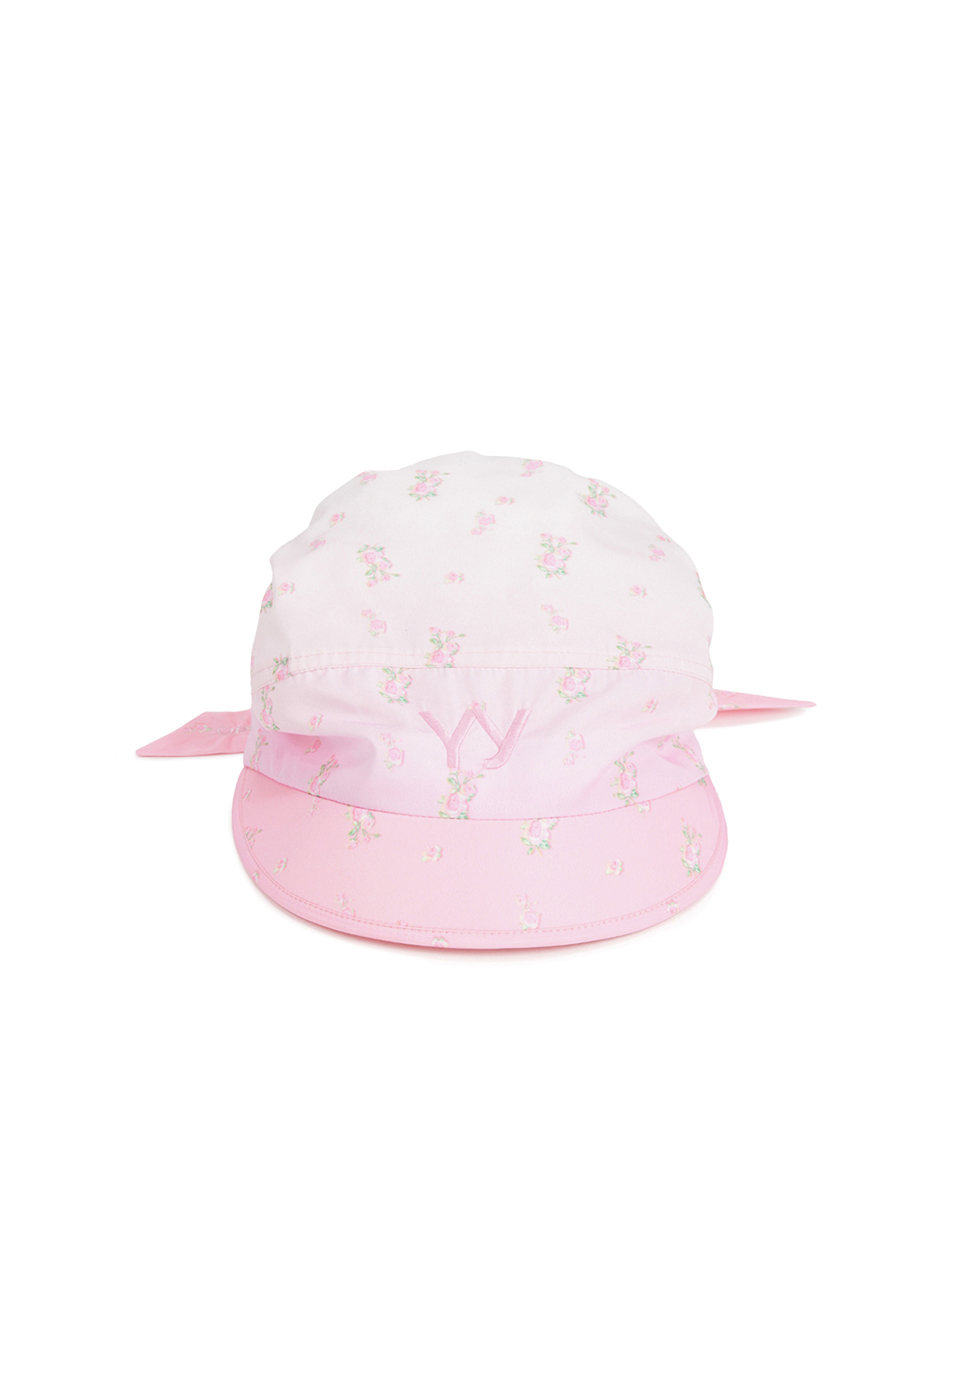 [Sustainable product] FLOWER TIE-UP HAT, PINK